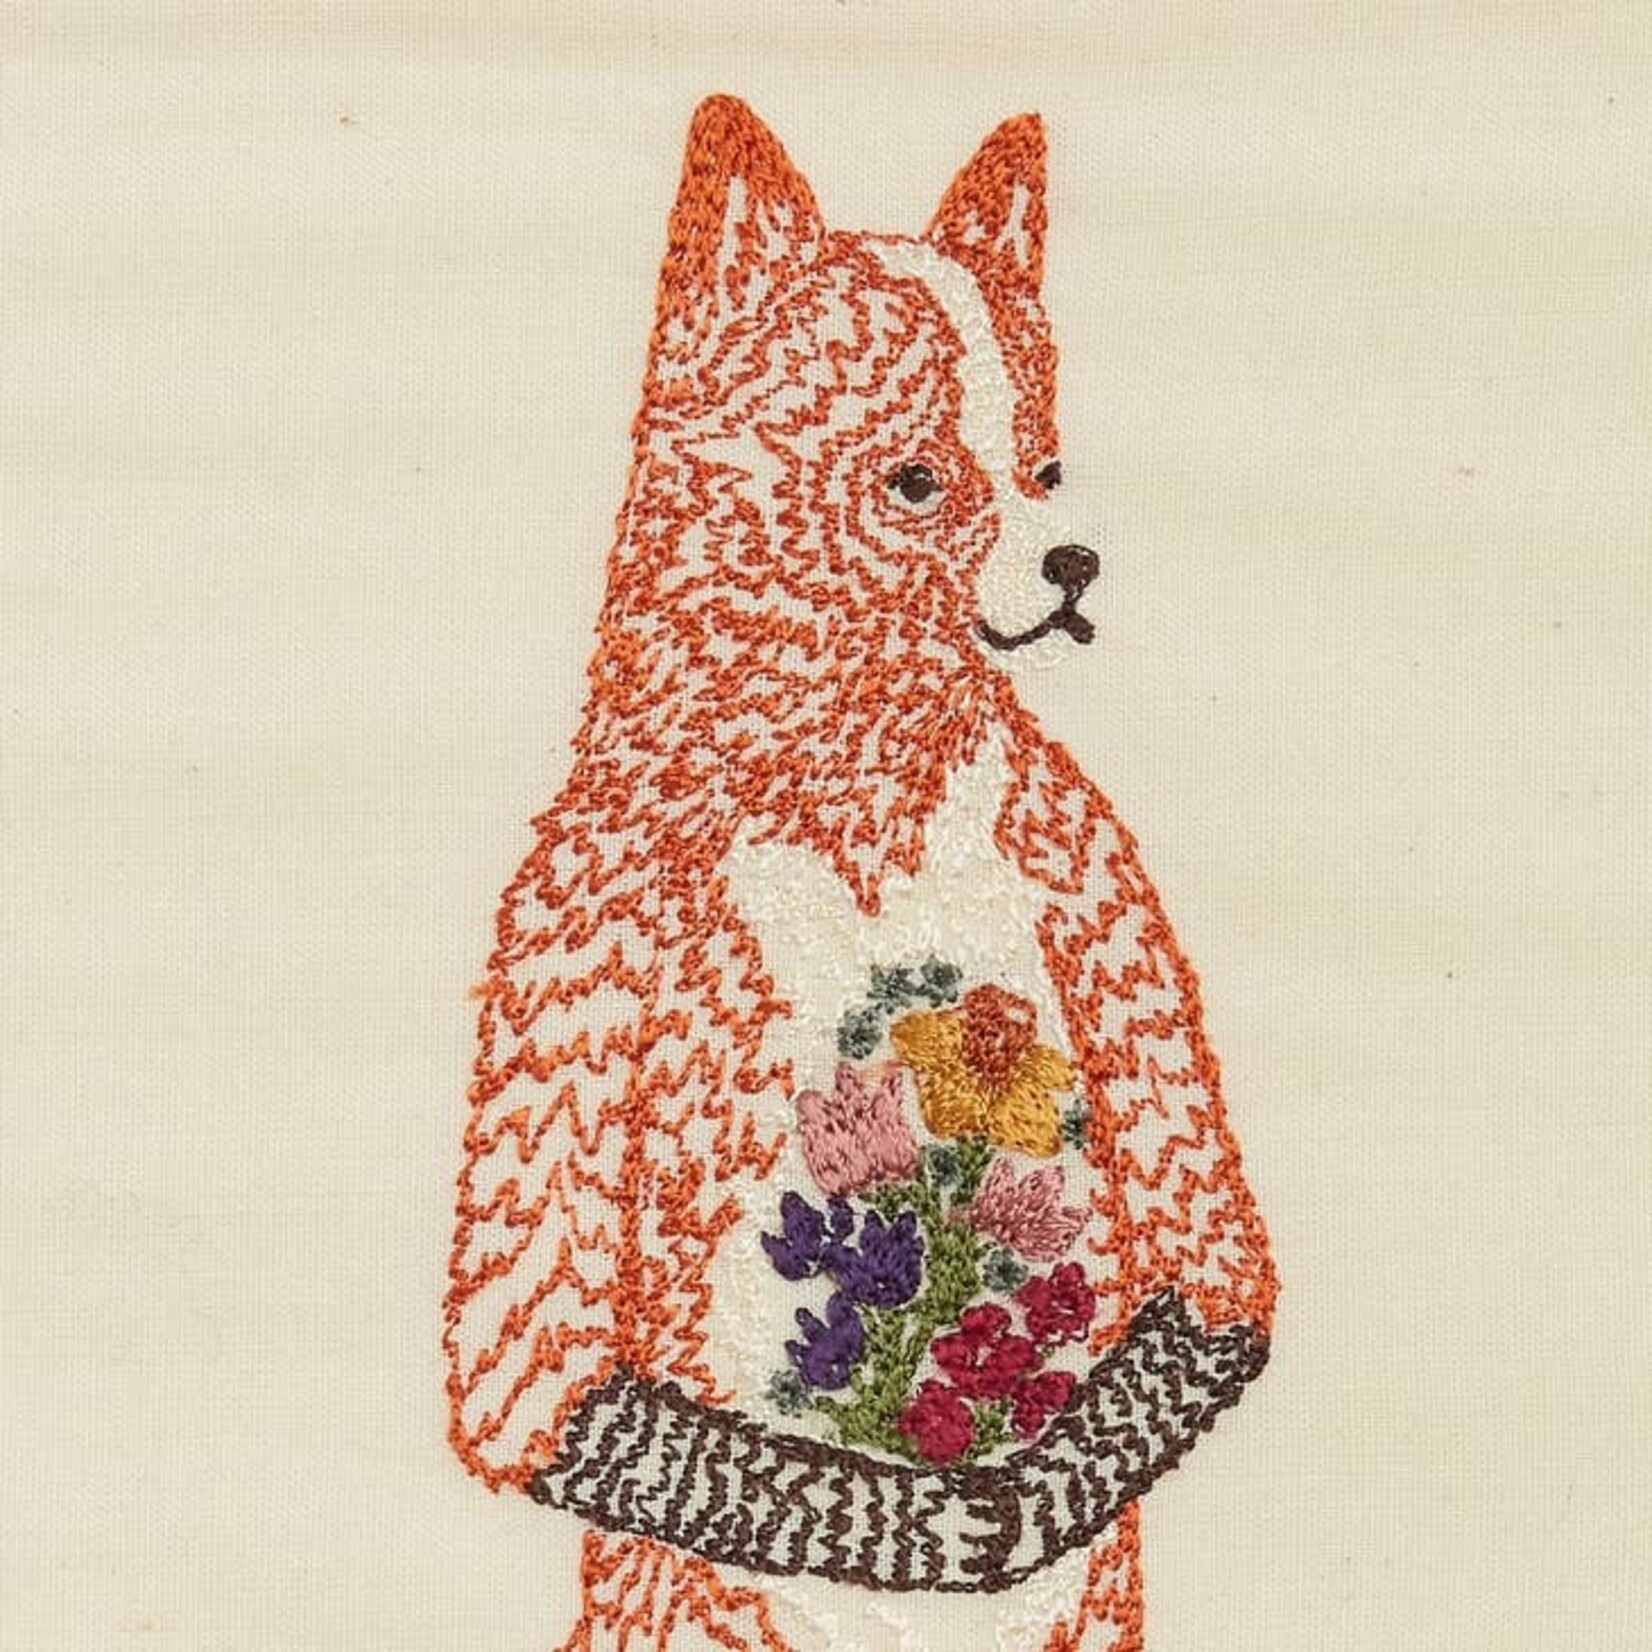 Greeting Cards - Handmade Fox With Flowers Emb Card